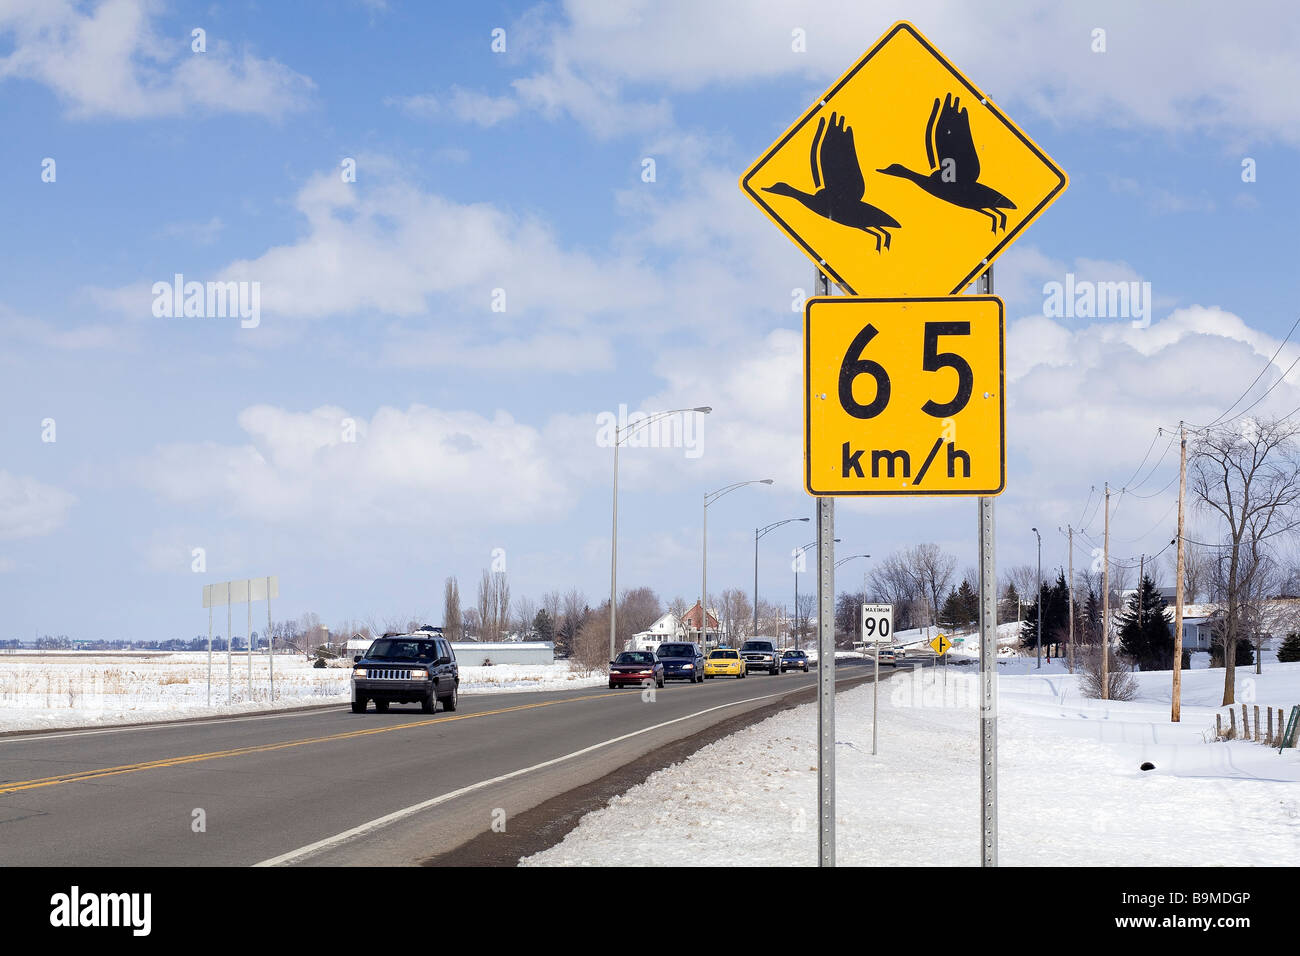 Canada, Quebec province, Baie du Febvre, on the southern bank of Lake Saint Pierre, between Montreal and Quebec, road sign Stock Photo